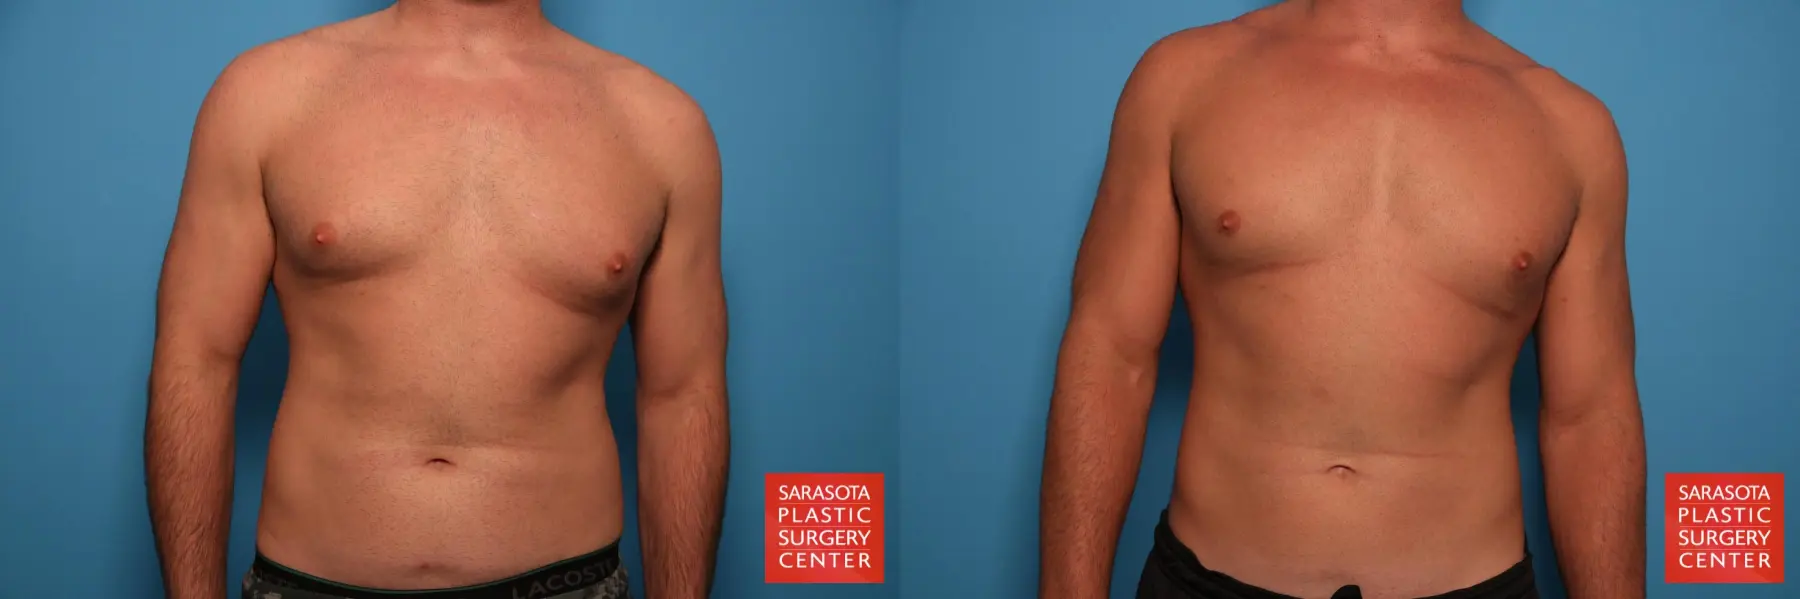 Gynecomastia: Patient 1 - Before and After  